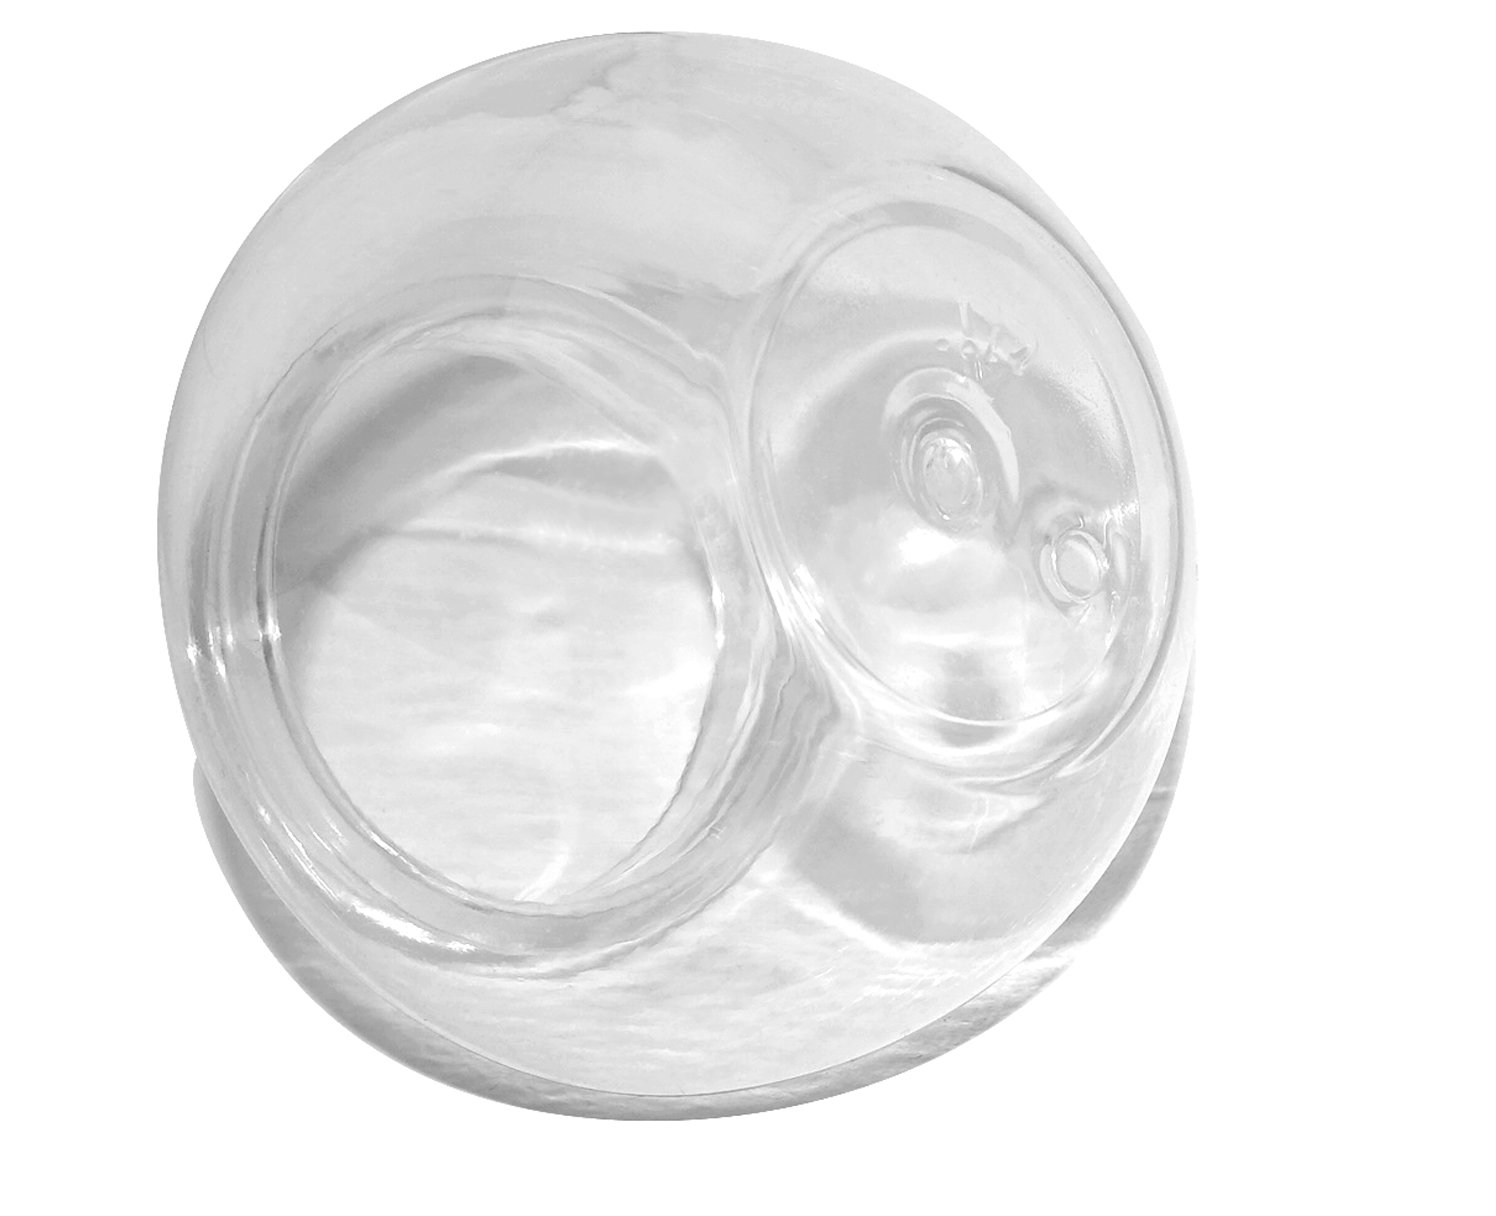 300ml factory wholesale empty round clear PET jar cosmetic baby cream plastic jar with screw lid